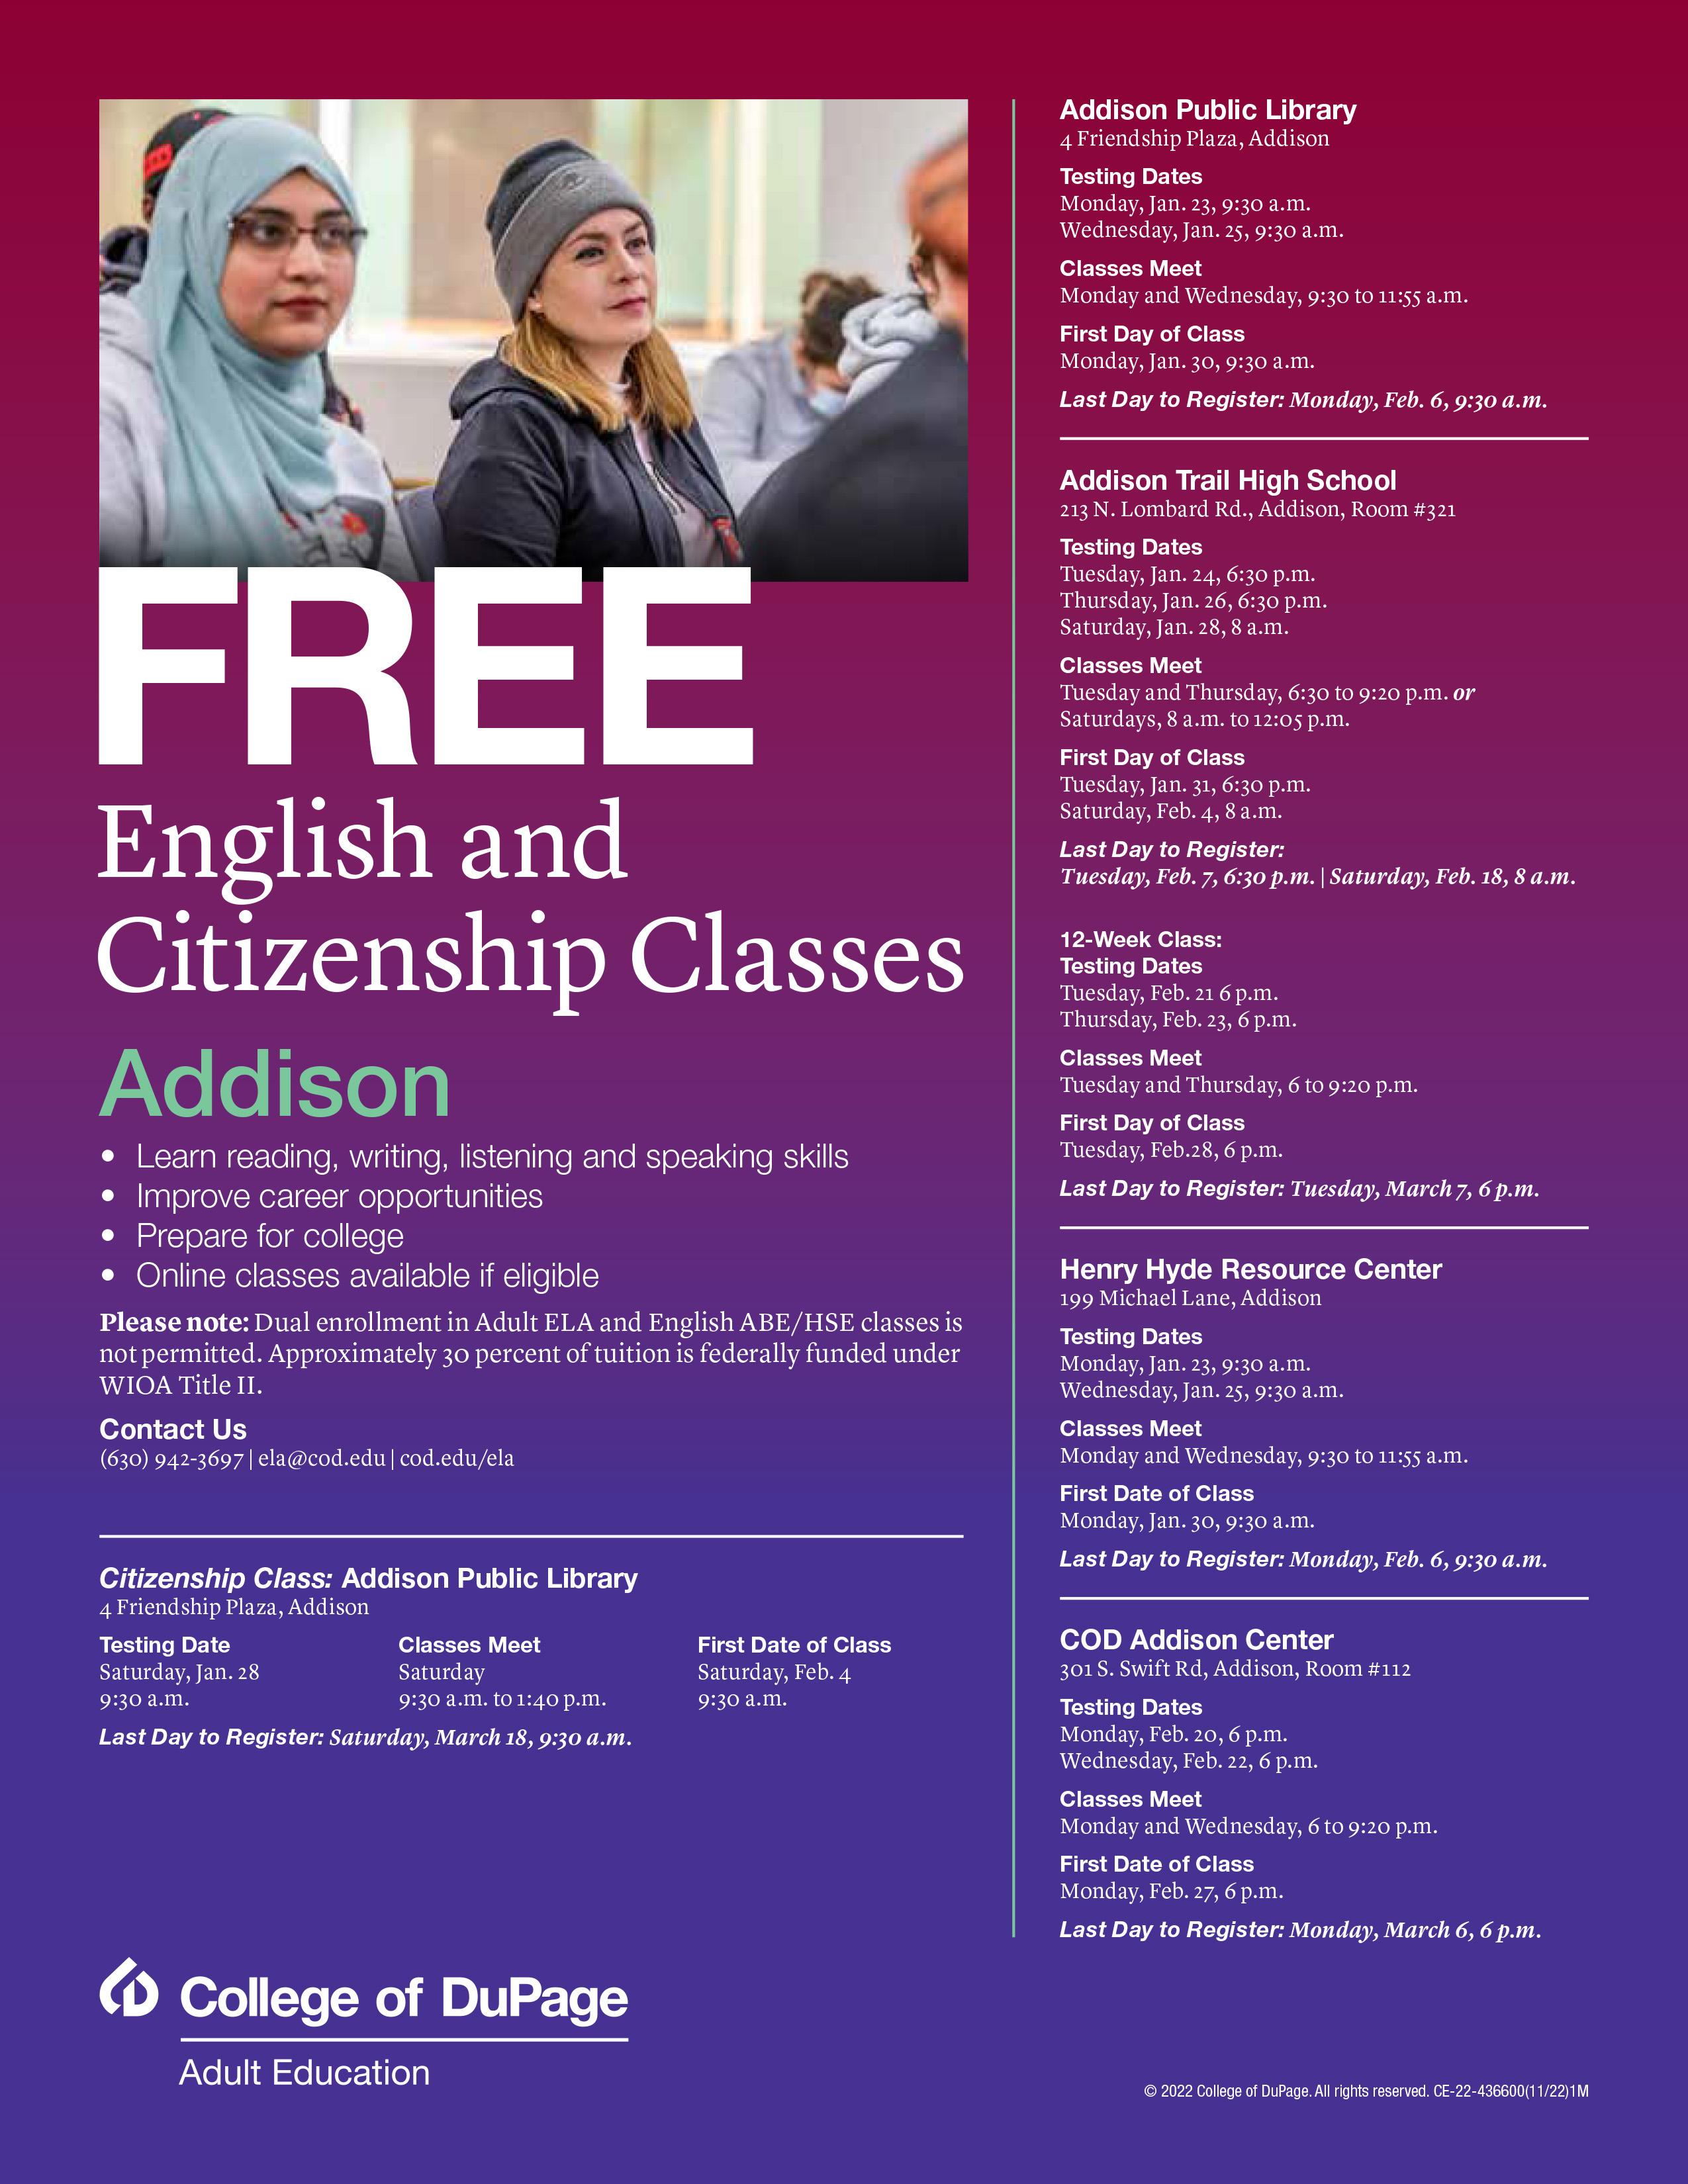 English and citizenship classes offered this winter in Addison